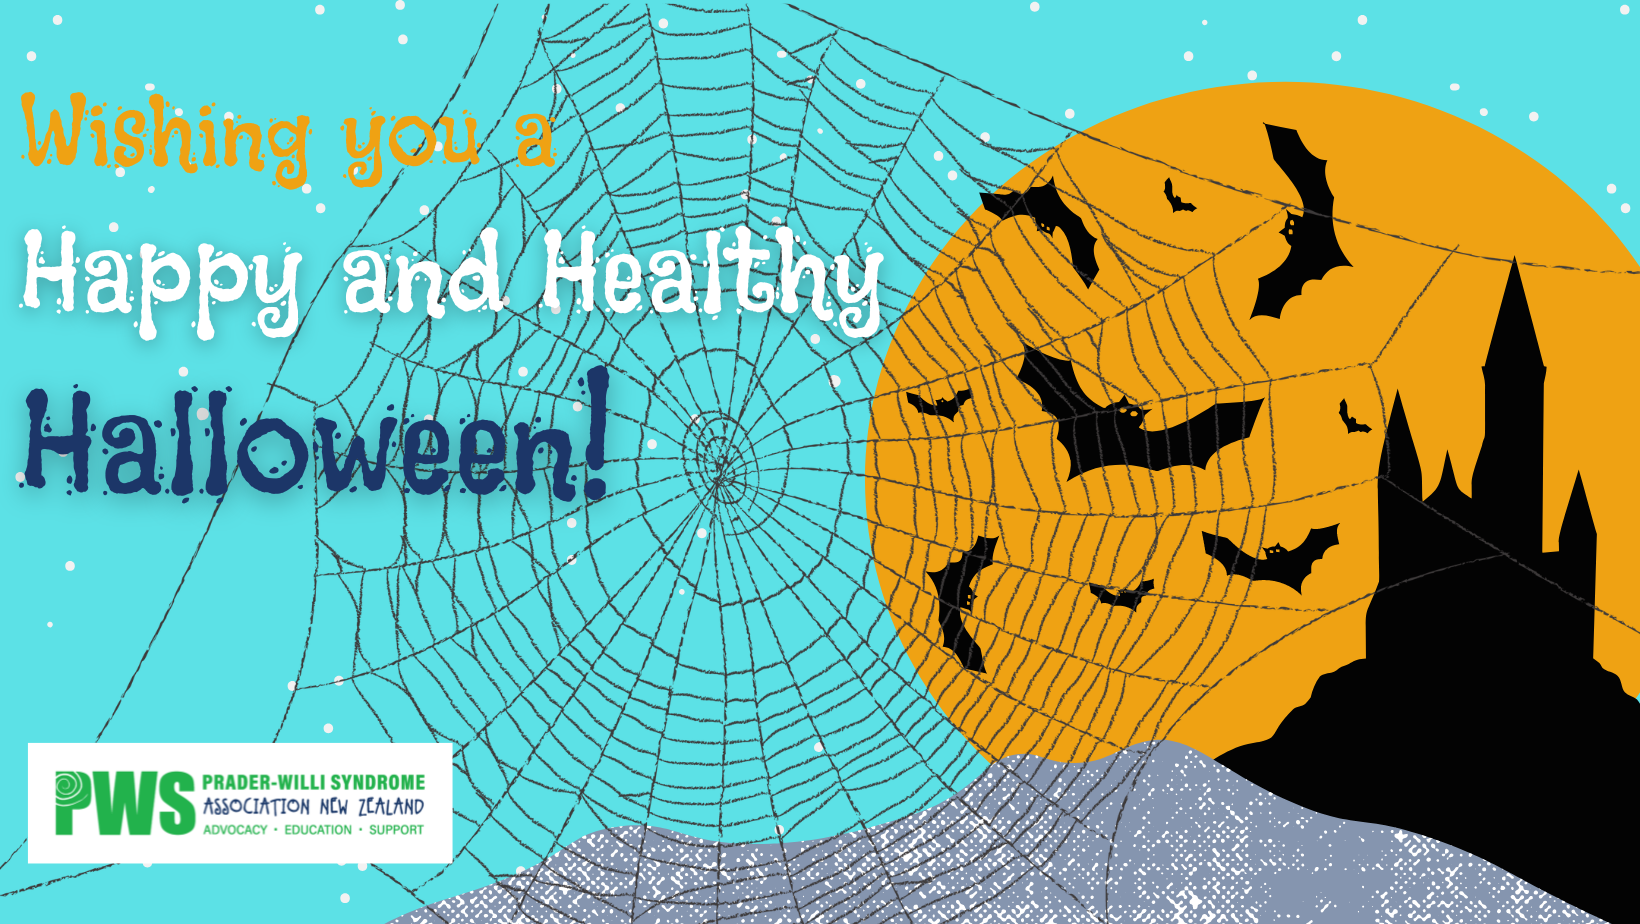 Tips For Managing Halloween In Prader-Willi Syndrome